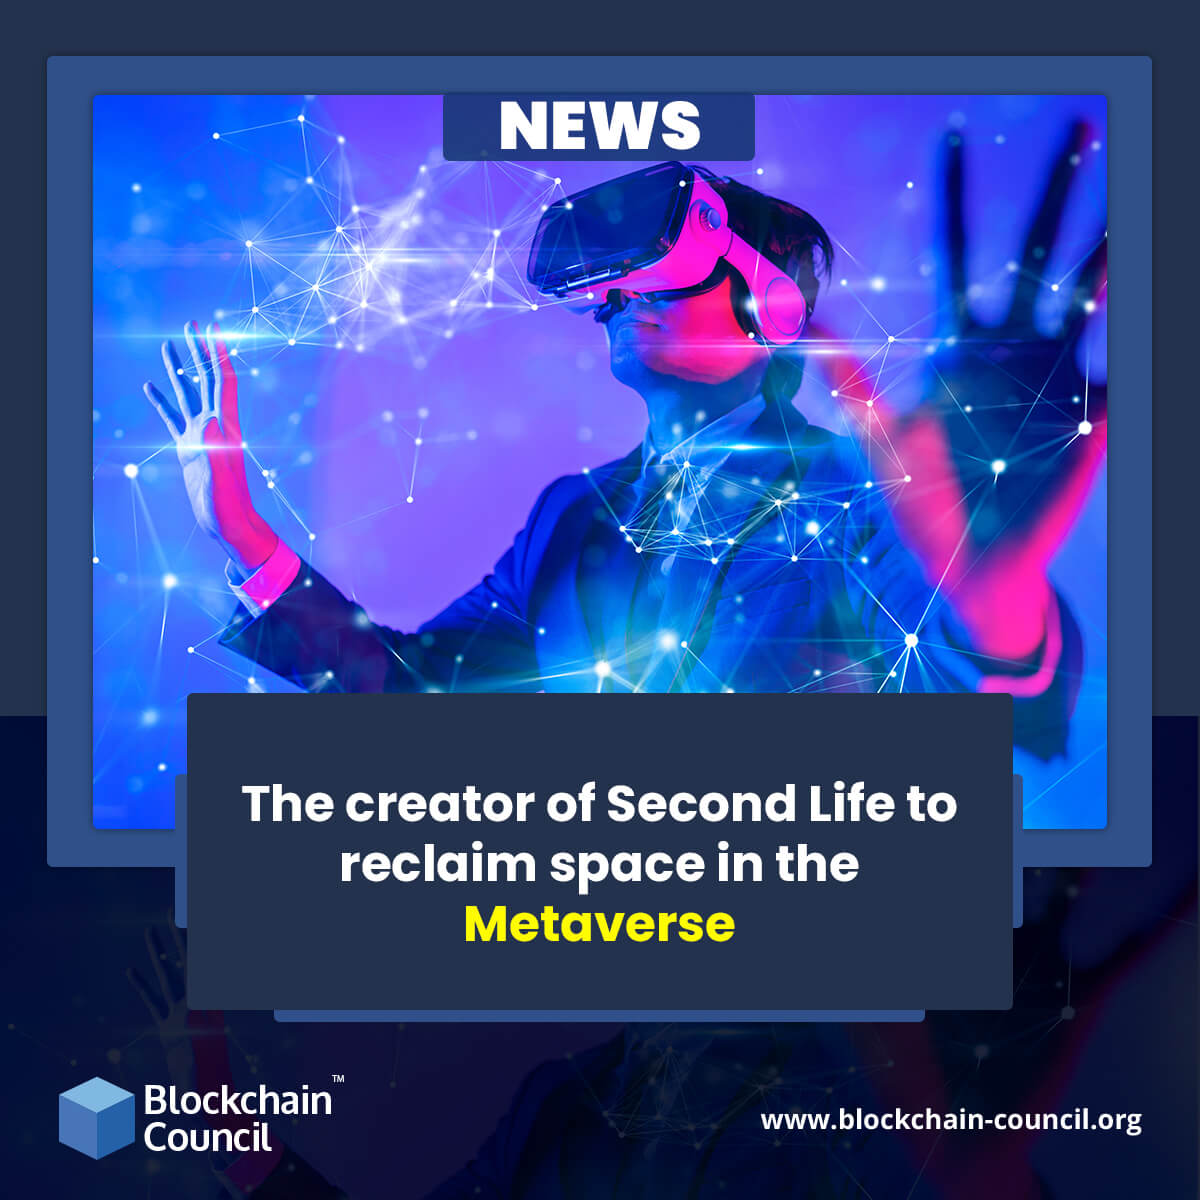 The creator of Second Life to reclaim space in the Metaverse